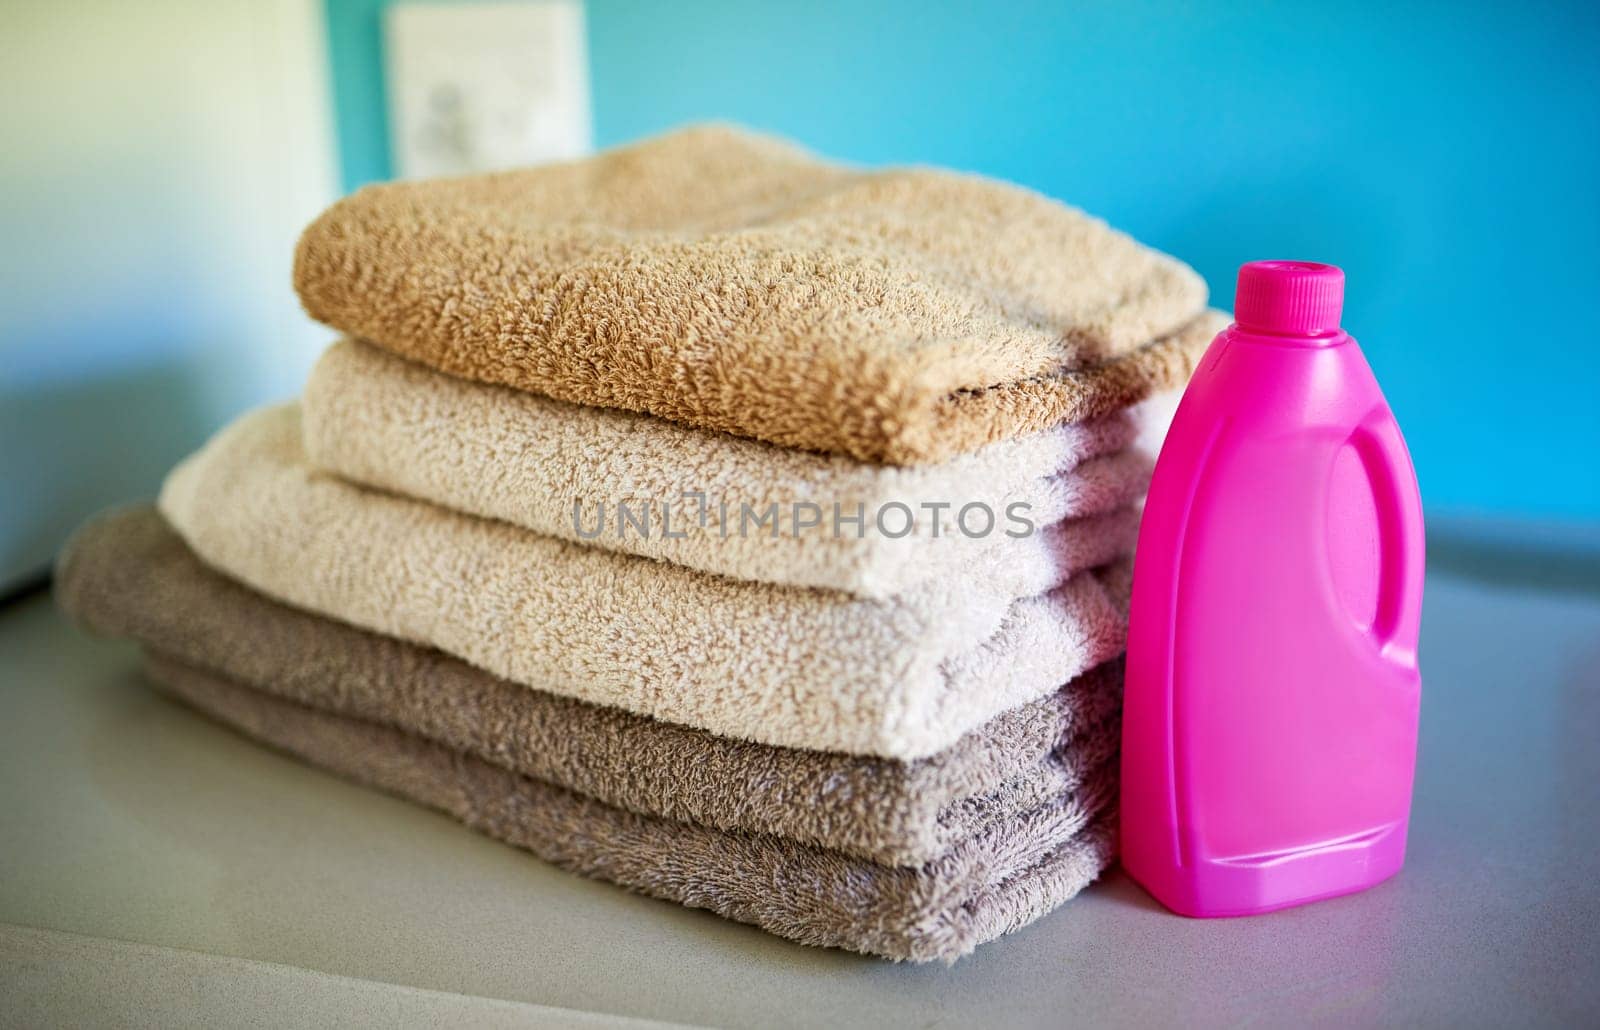 Towels, detergent and washing laundry for hygiene for spring cleaning home or bacteria, product or household. Cloth, sanitary and folded for neat organizing or soft linen cleanser, service or stack.